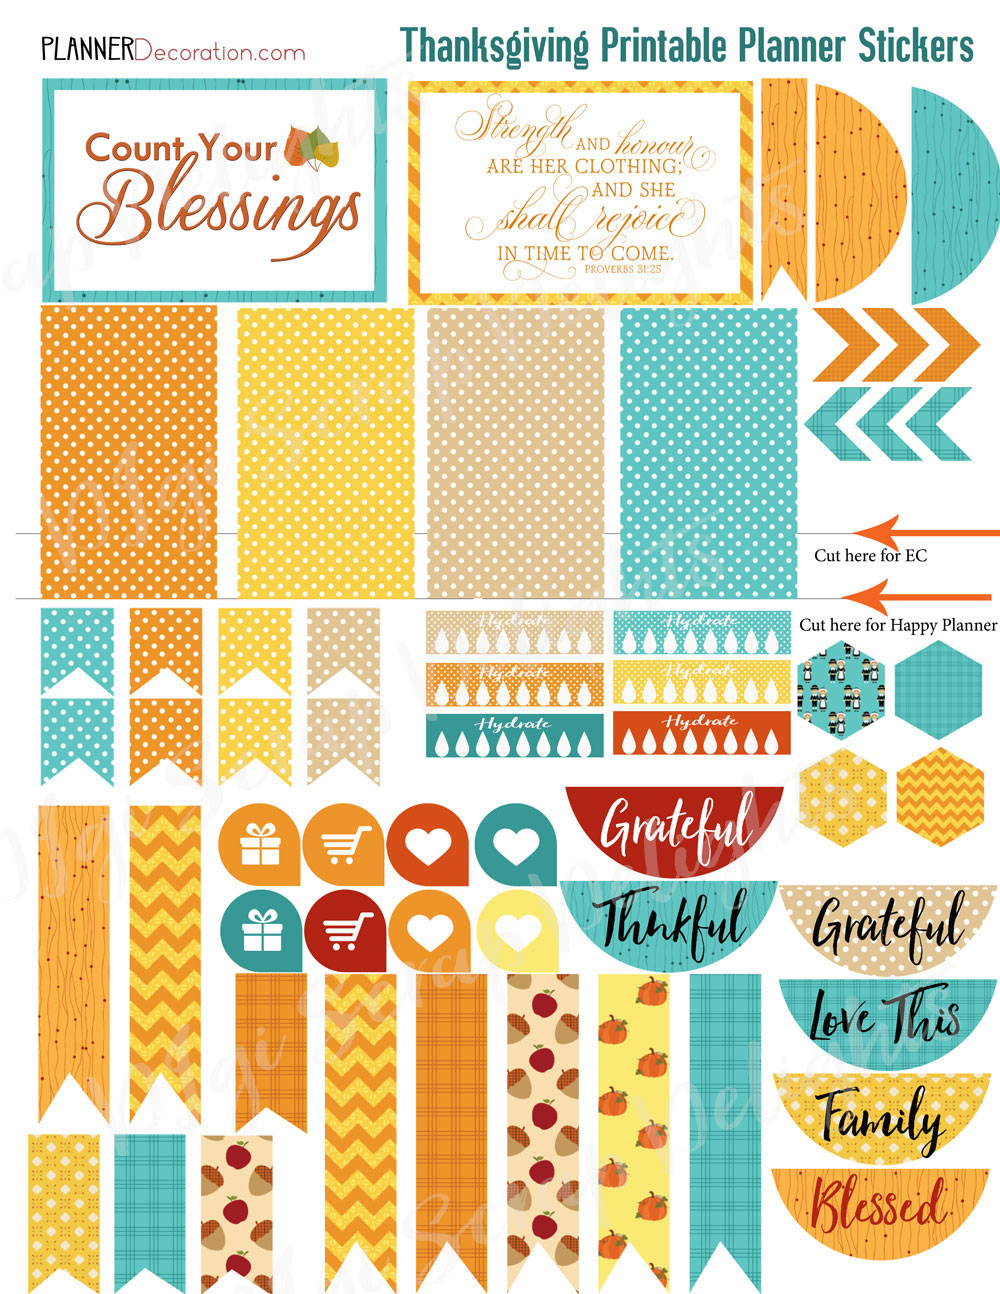 FREEBIE Printable Planner Stickers with Bible Verses for any size planner and 50% Off Thanksgiving Bundle.#Planneraddict #Plannerlove #Biblejournaling